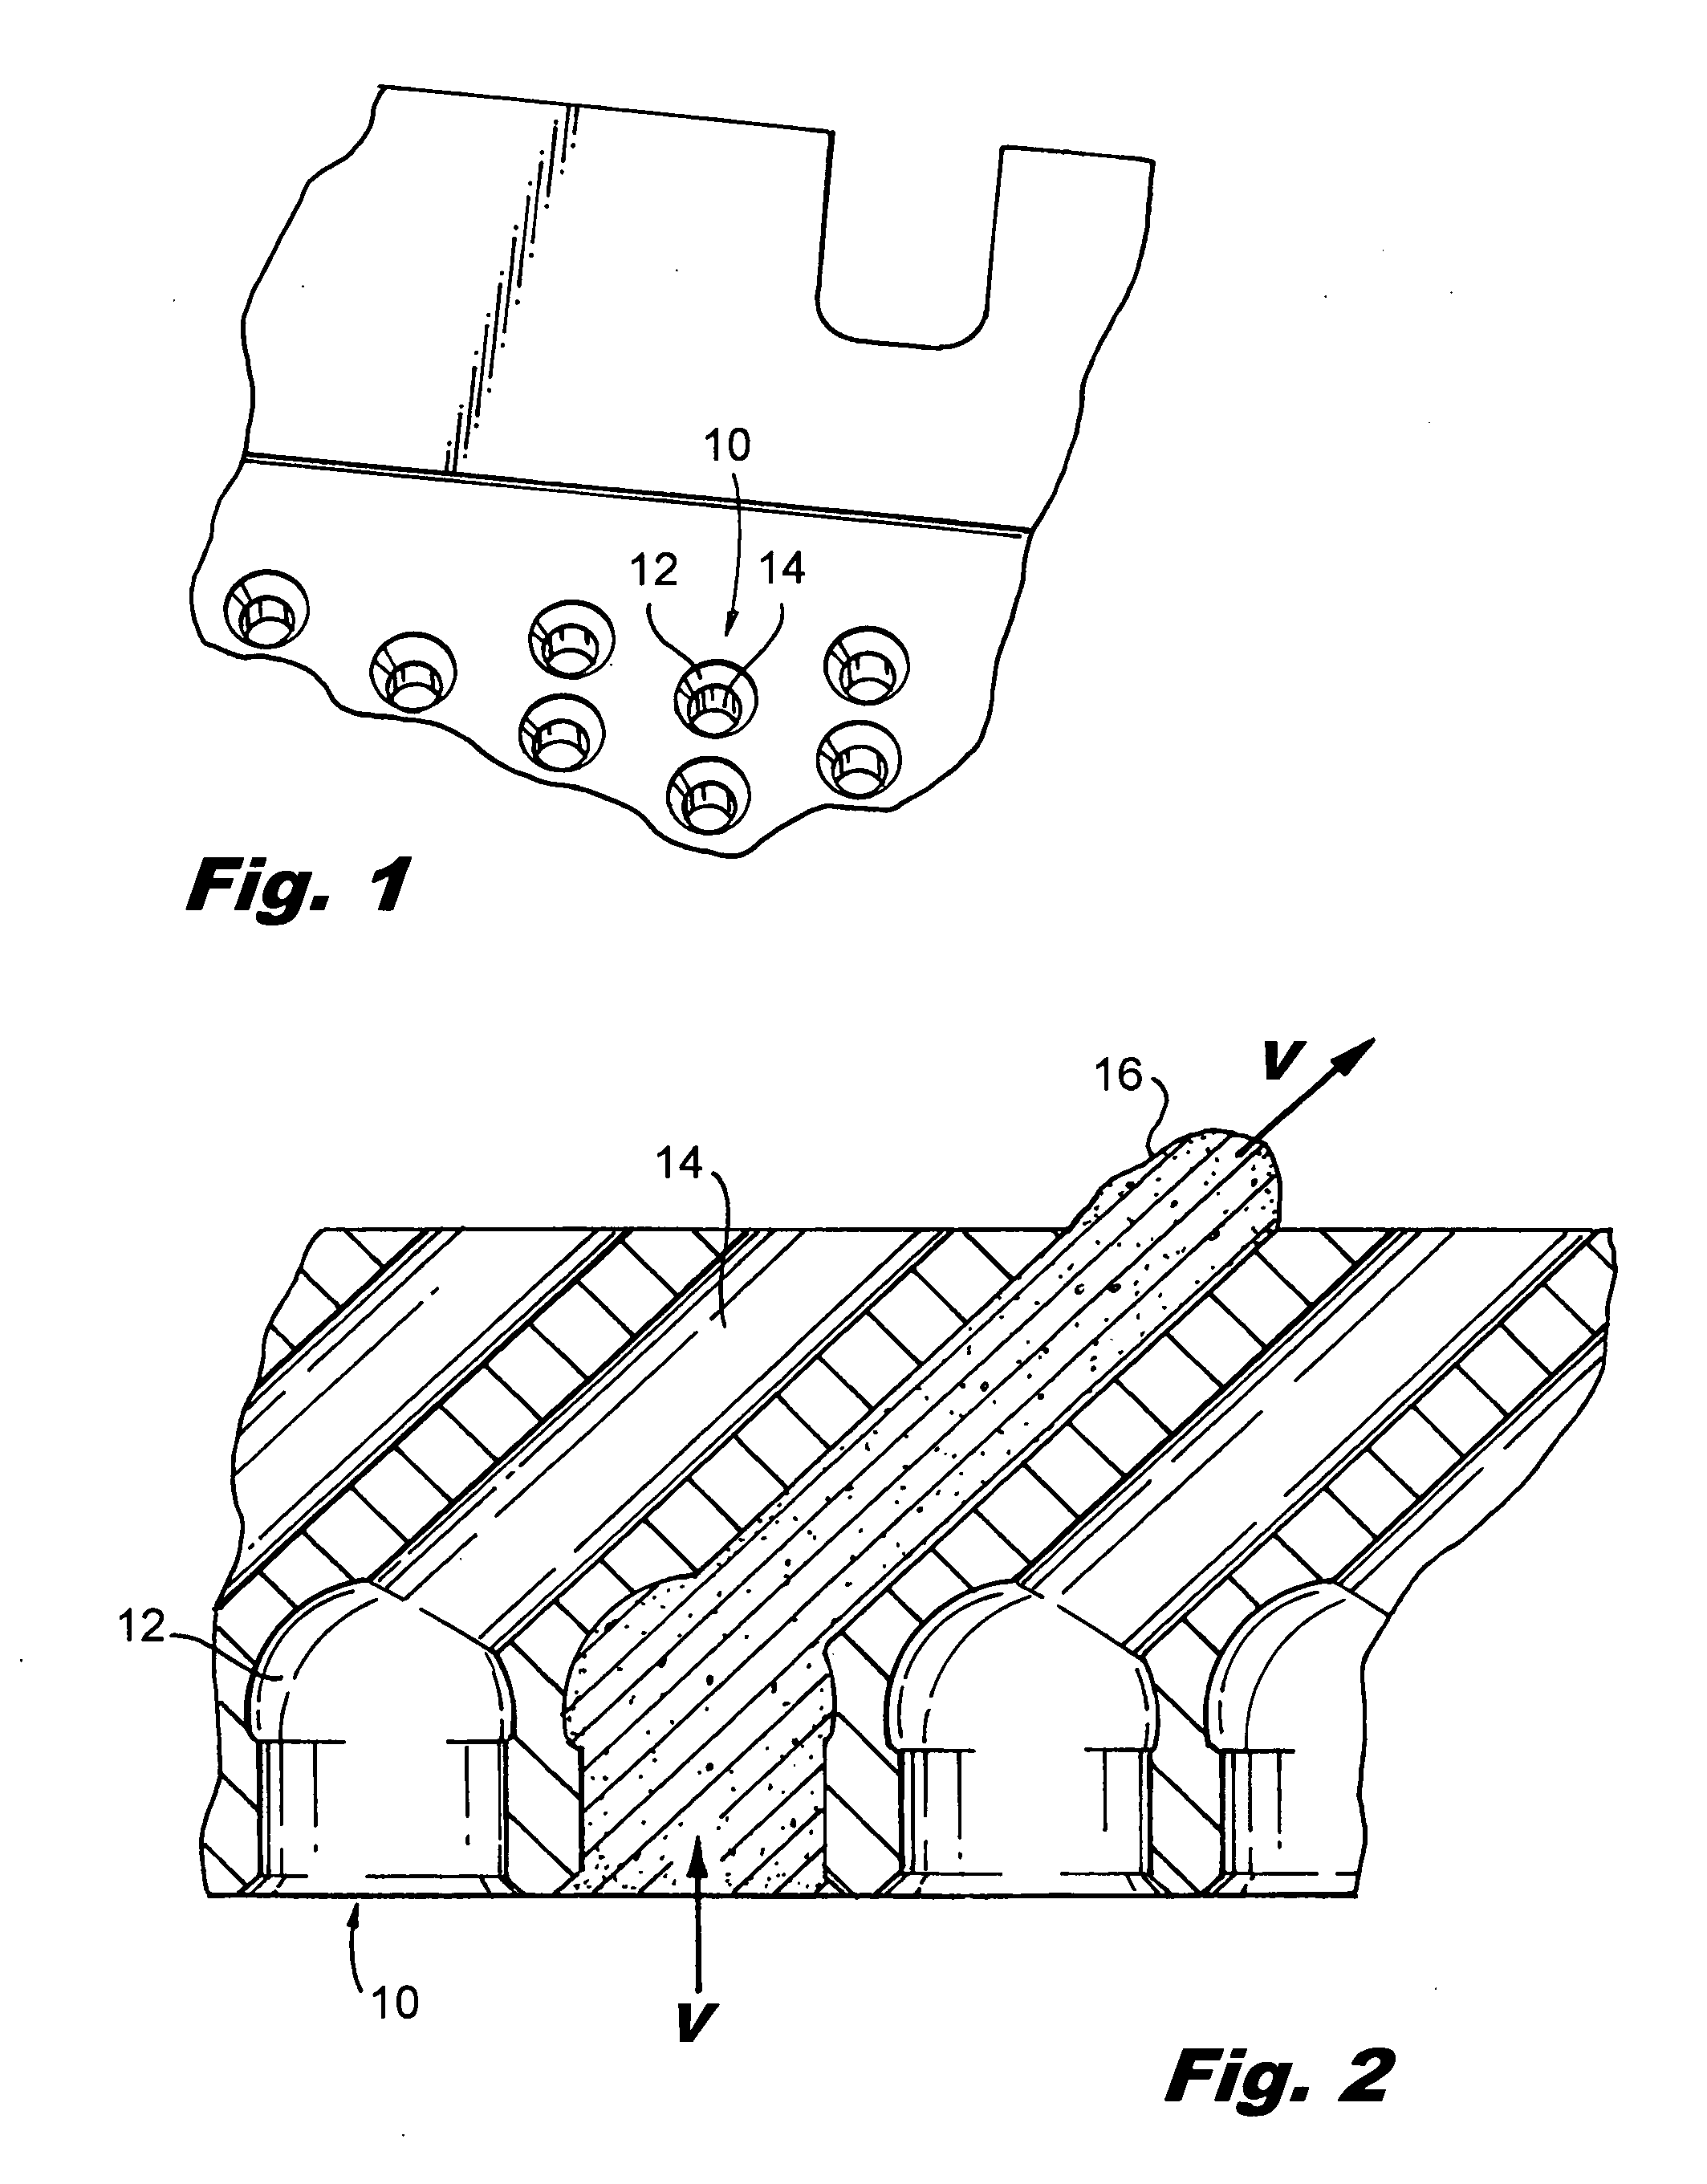 System and method for creating a venturi effect within an orifice